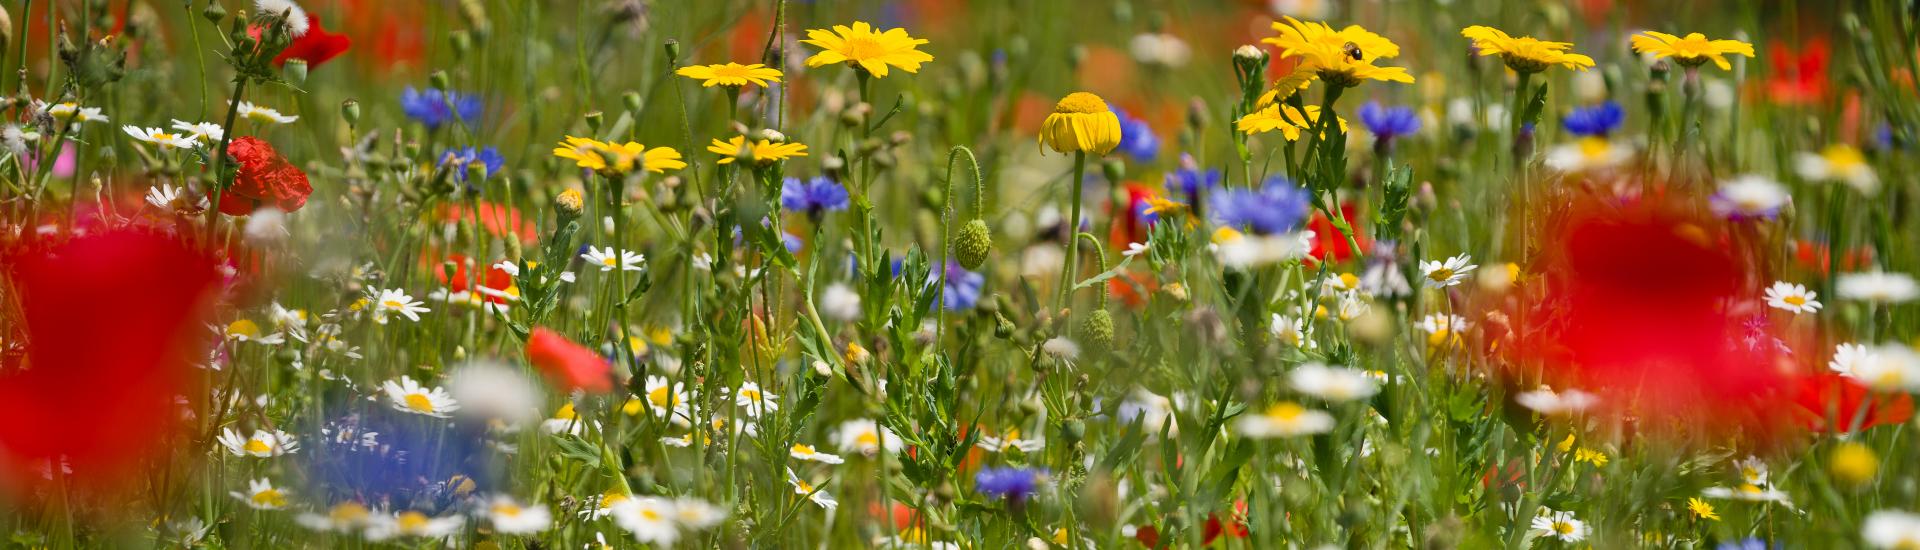 A wildflower meadow with yellow, purple, white and red flowers in bloom